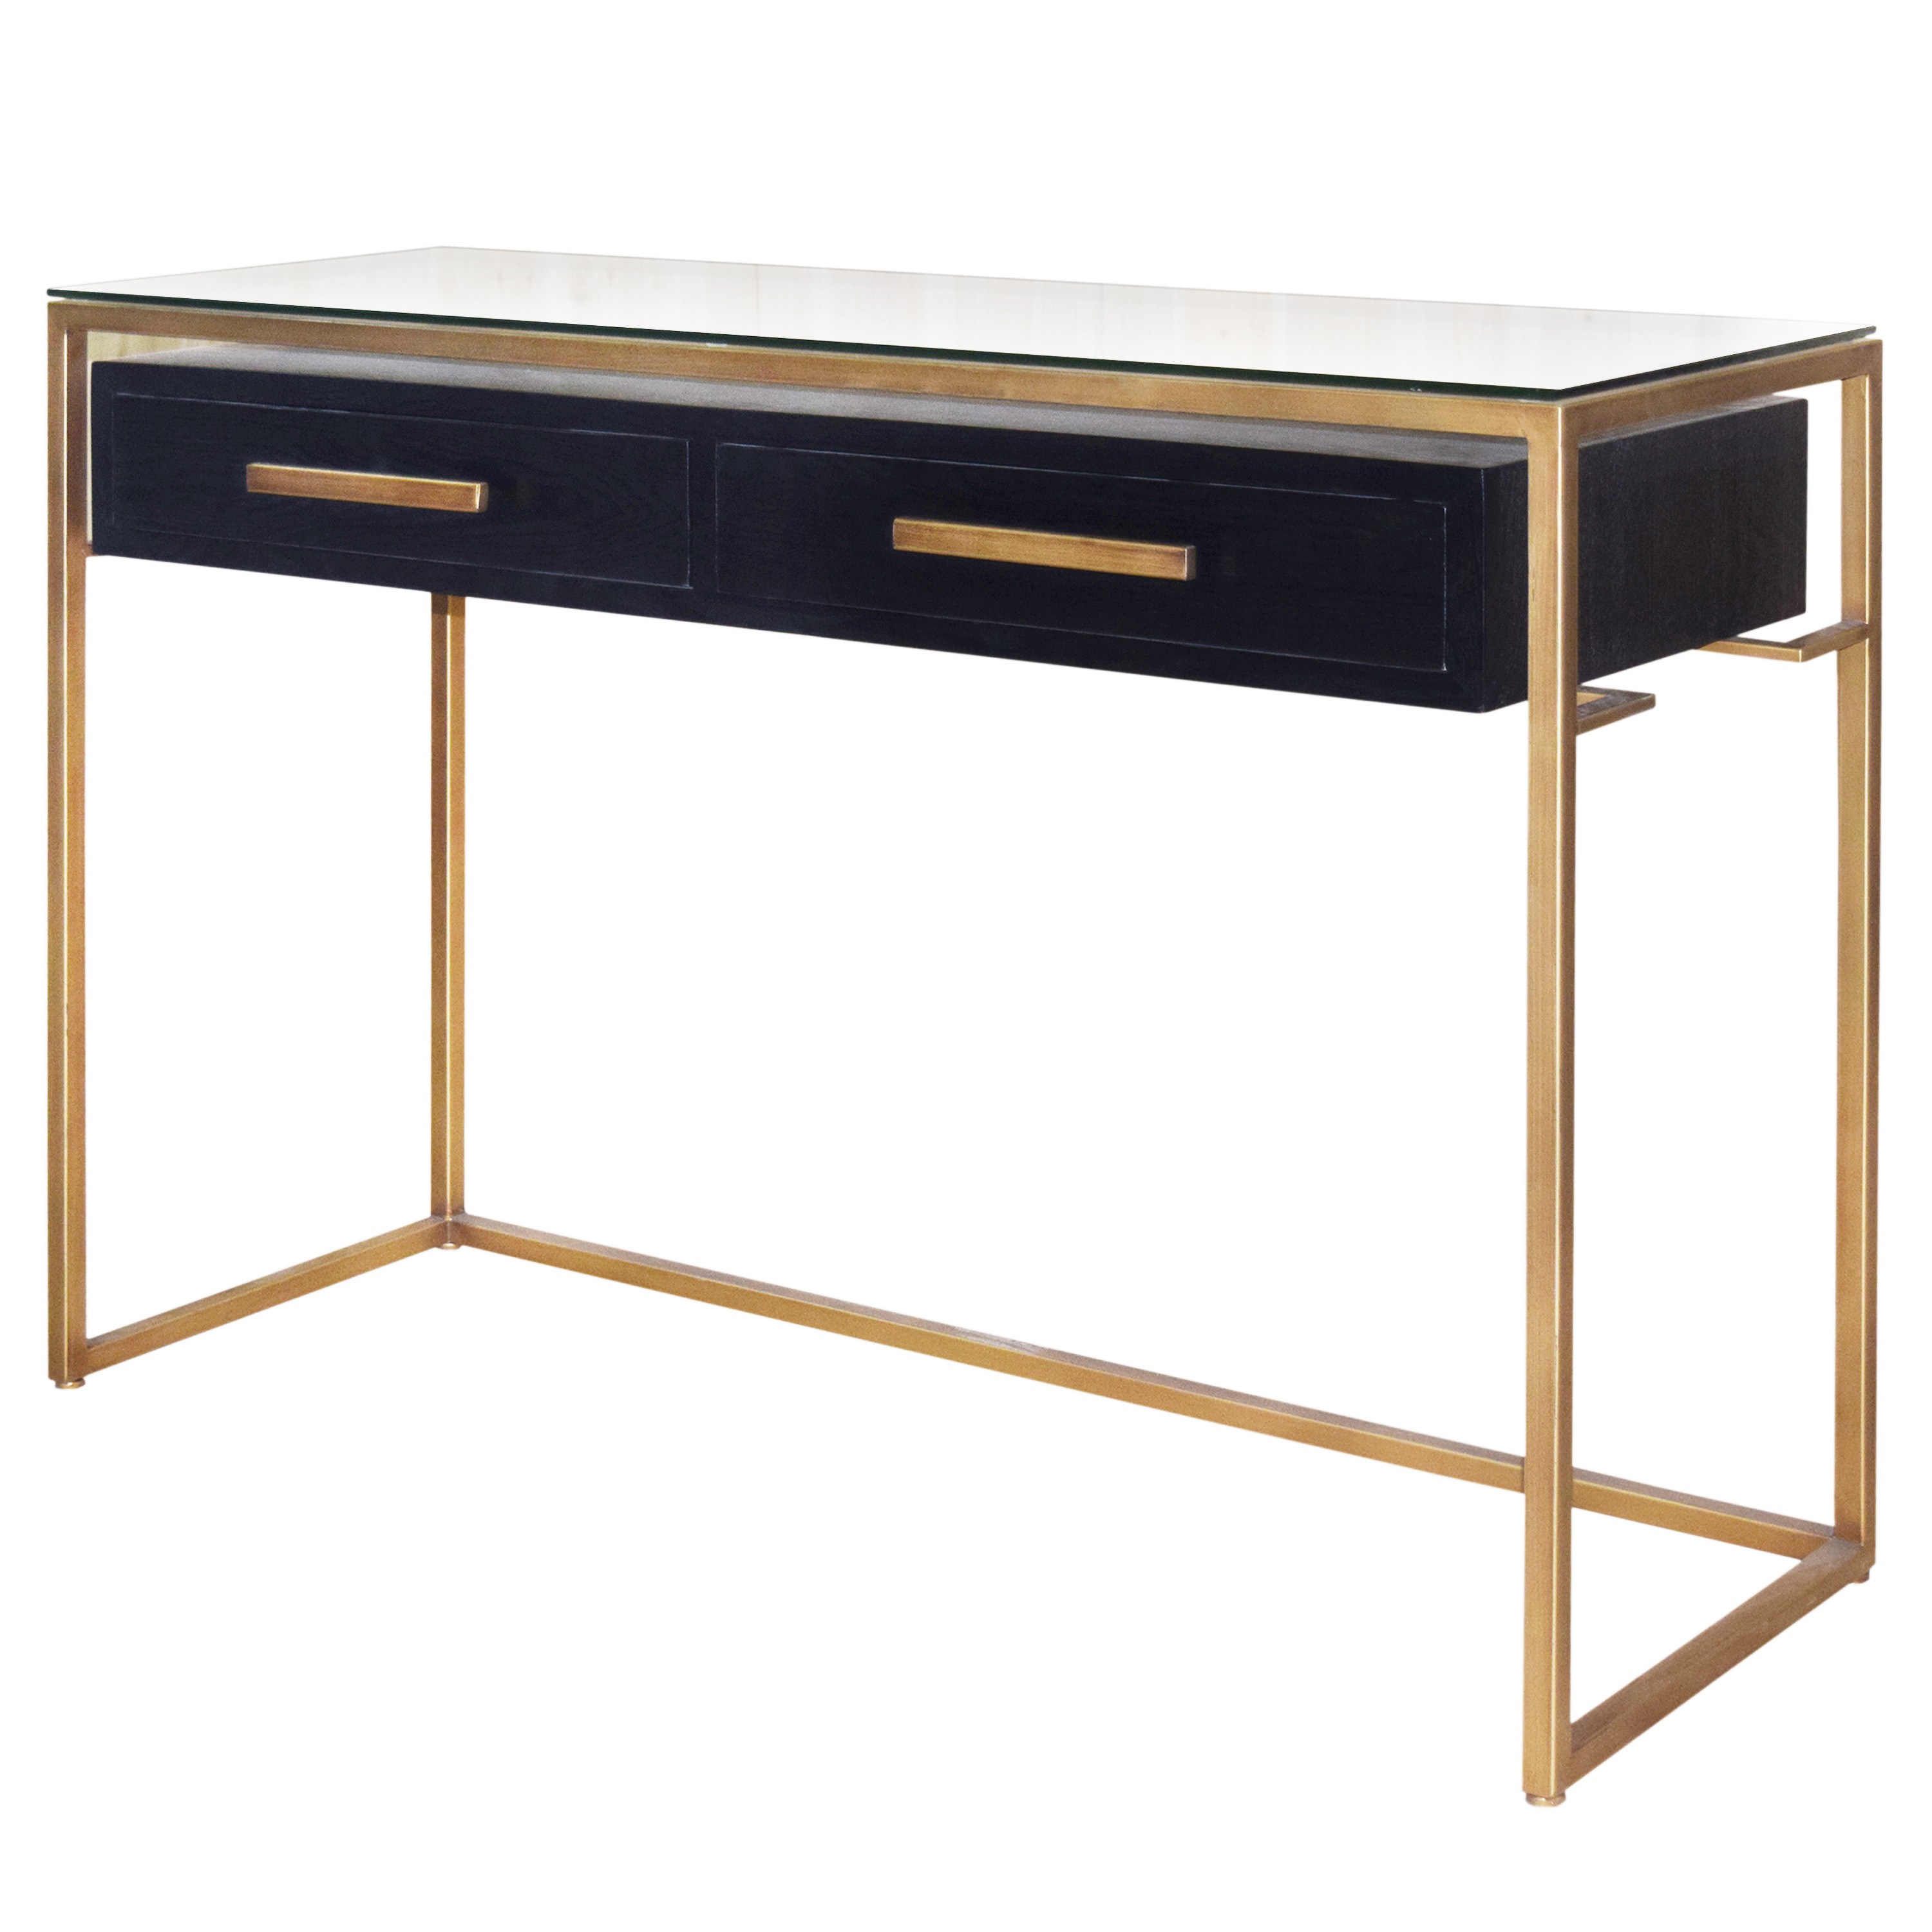 Firenze Floating Console Table W 2 Drawers Gold Frame Espresso